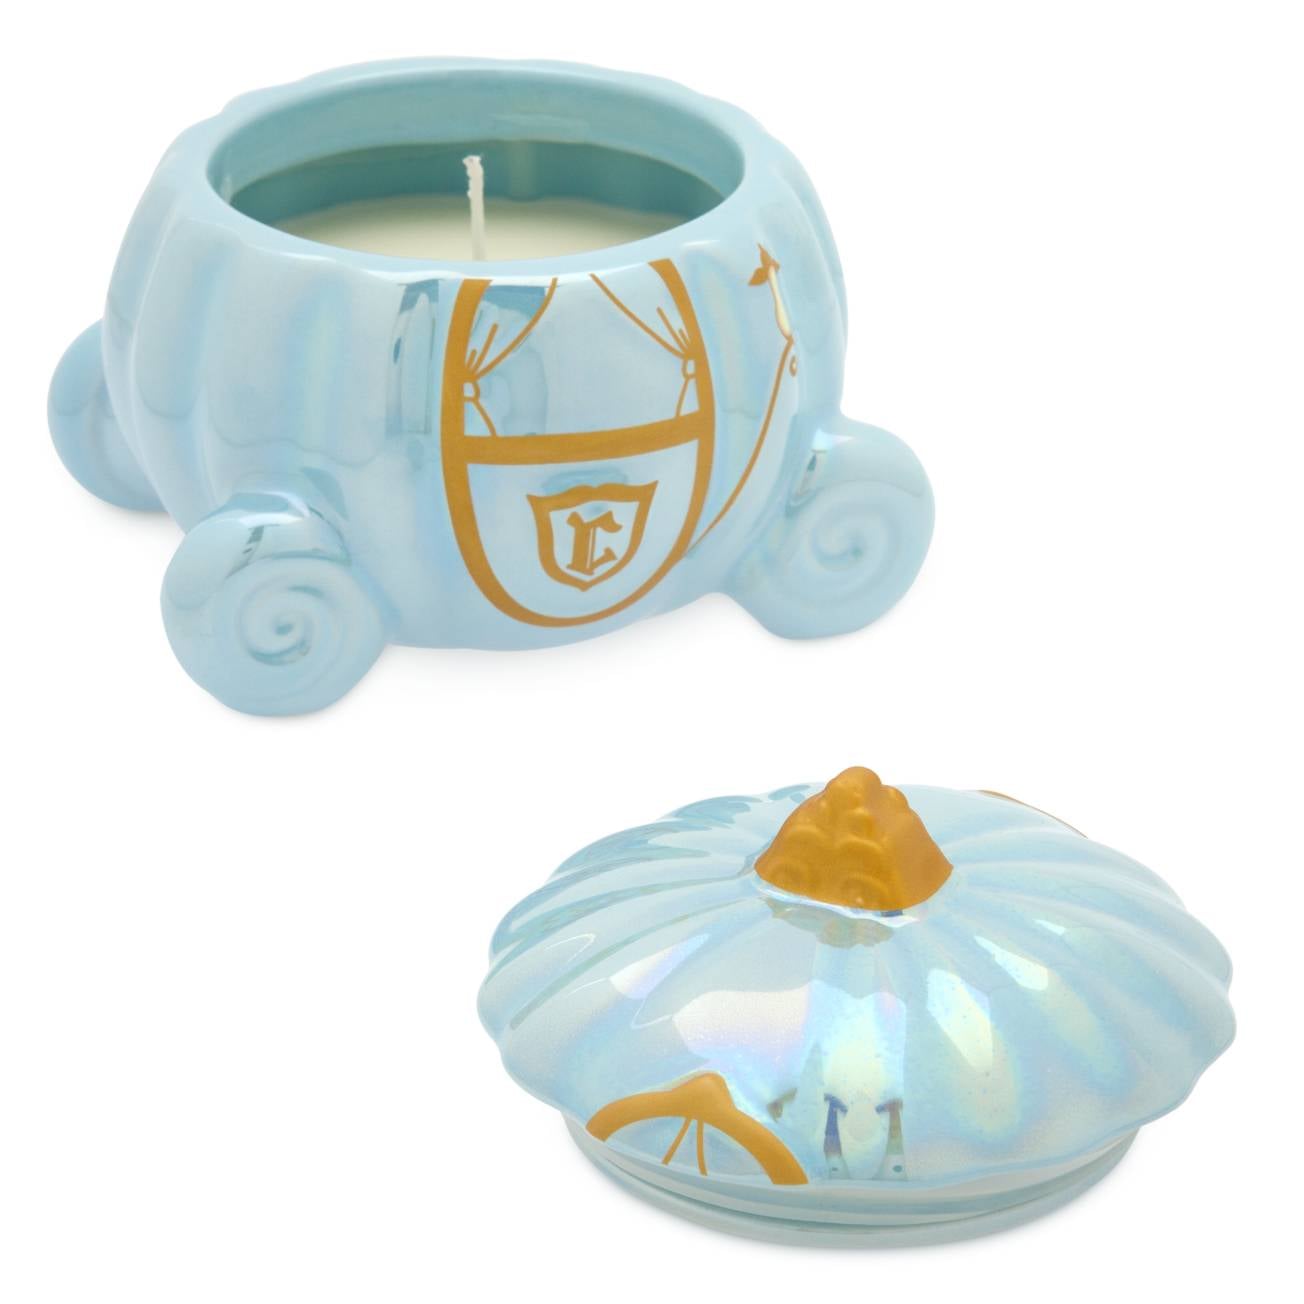 A Pumpkin-Spice Scented Candle: "Cinderella" Pumpkin Coach Candle With Lid